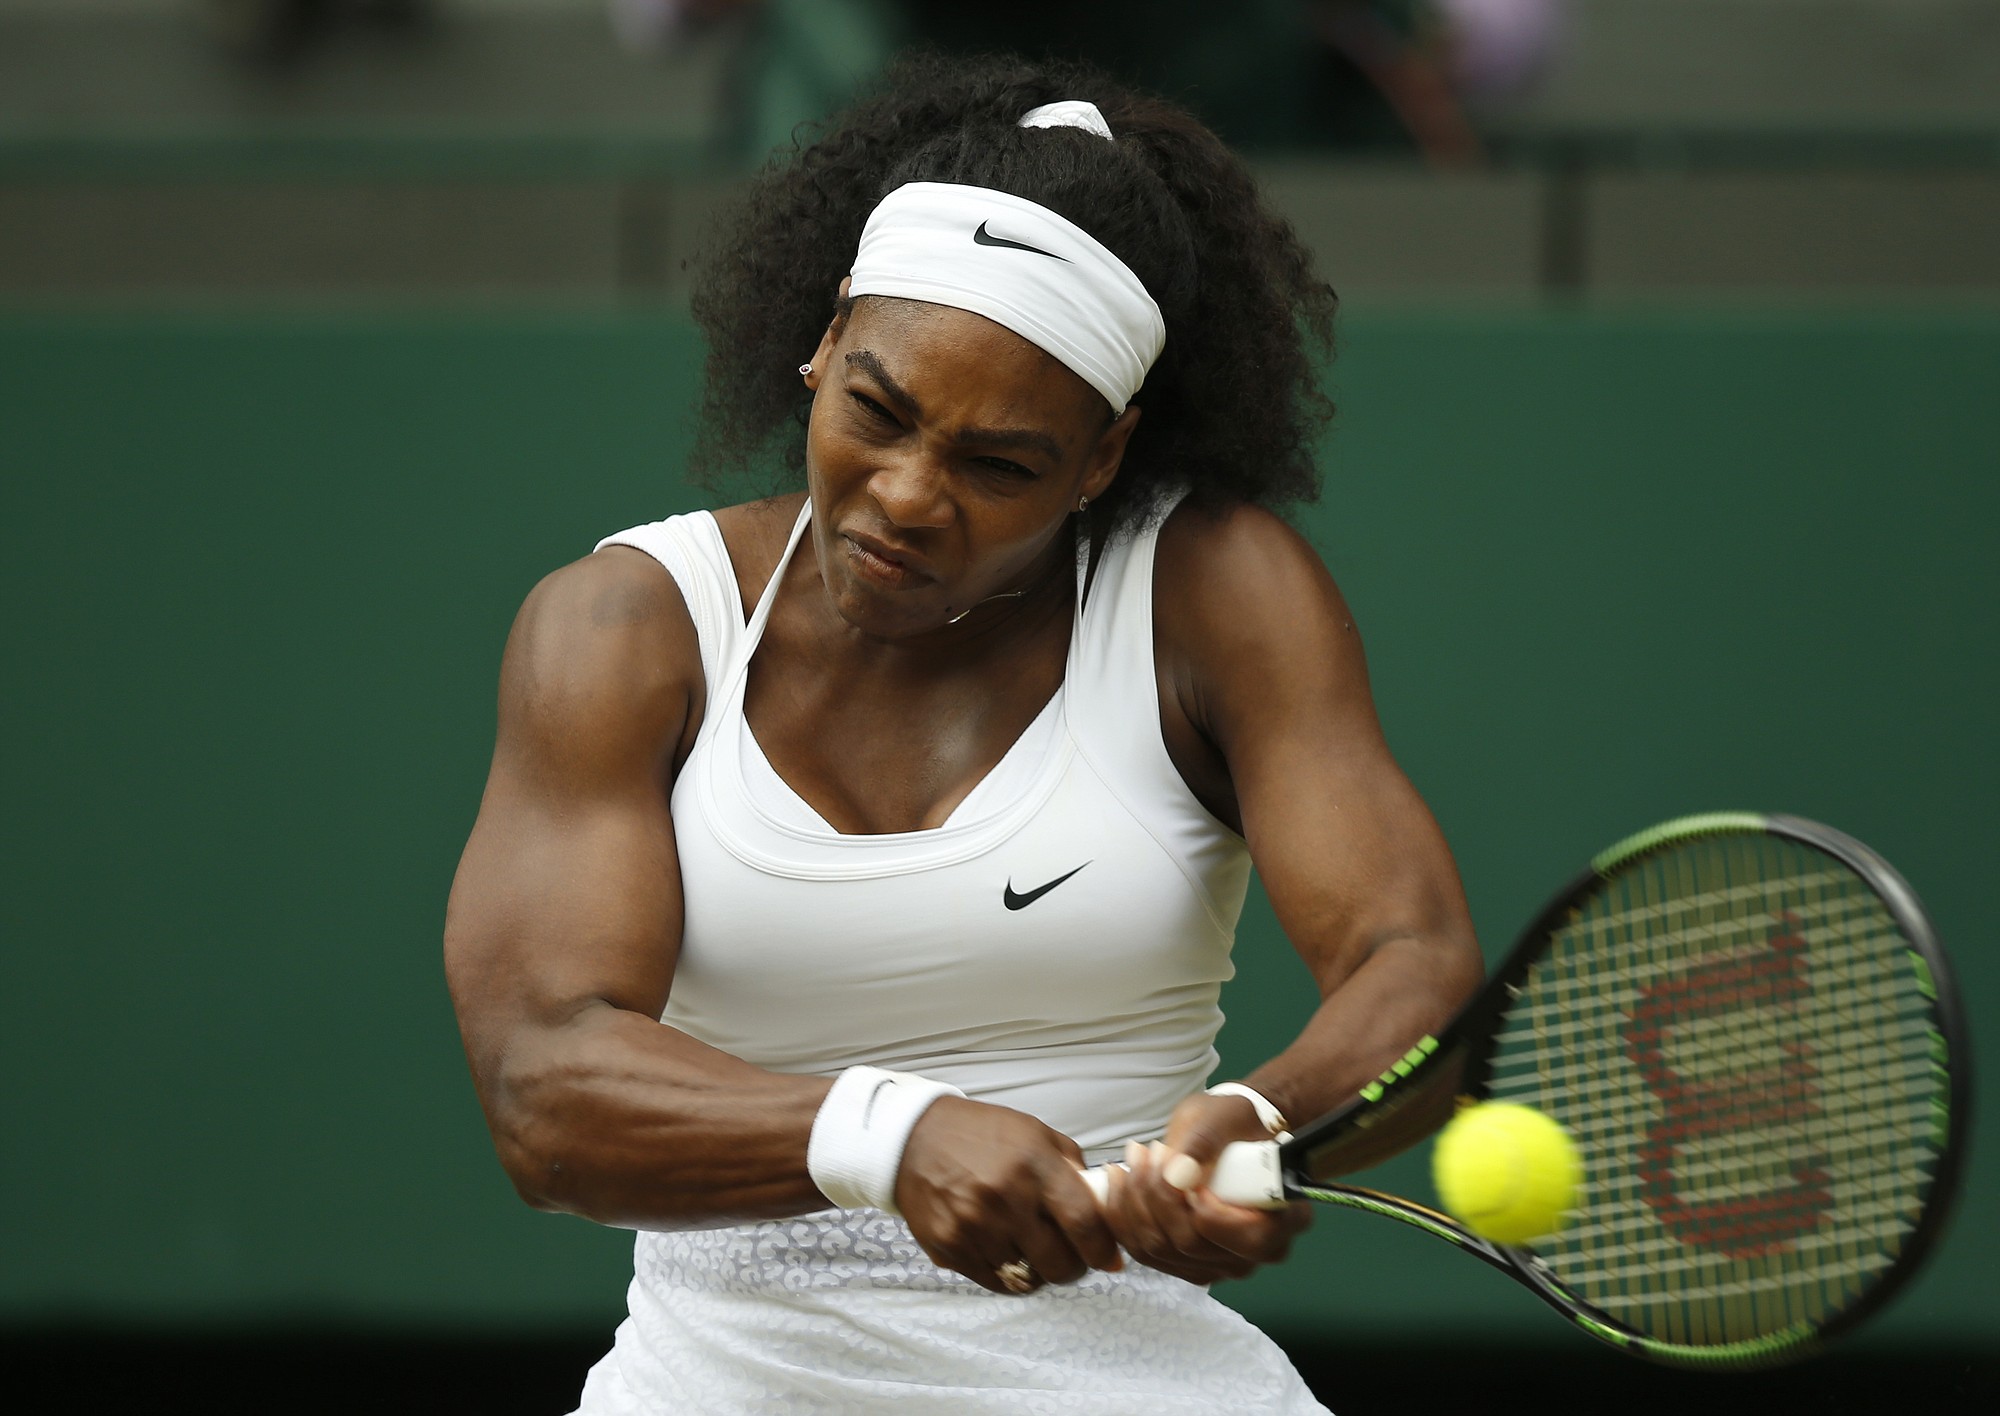 In a New York Times article, Serena Williams' muscular physique was contrasted against other players who, either by nature or nurture, have a more feminine appearance.